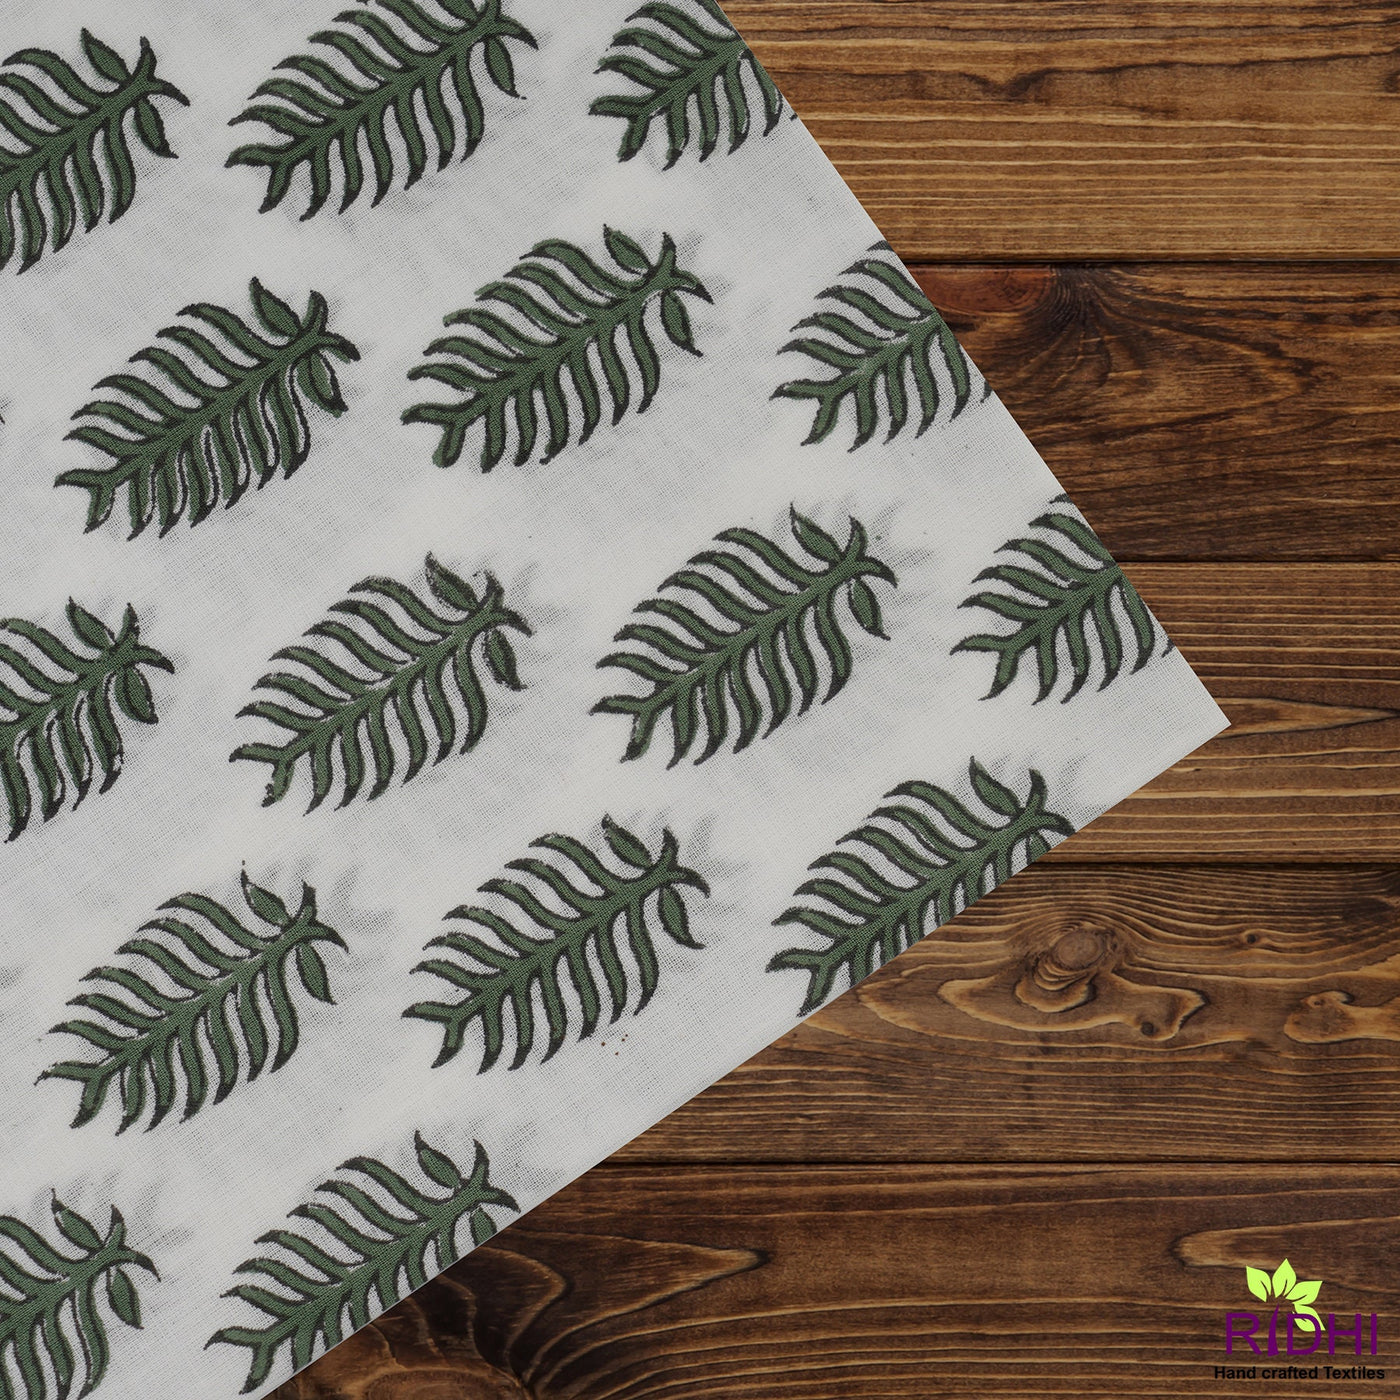 Fabricrush Juniper Green Indian Hand Block Leaf Printed Pure Cotton Cloth Eco-friendly Napkins, Gifts, 18x18"- Cocktail Napkins, 20x20"- Dinner Napkins